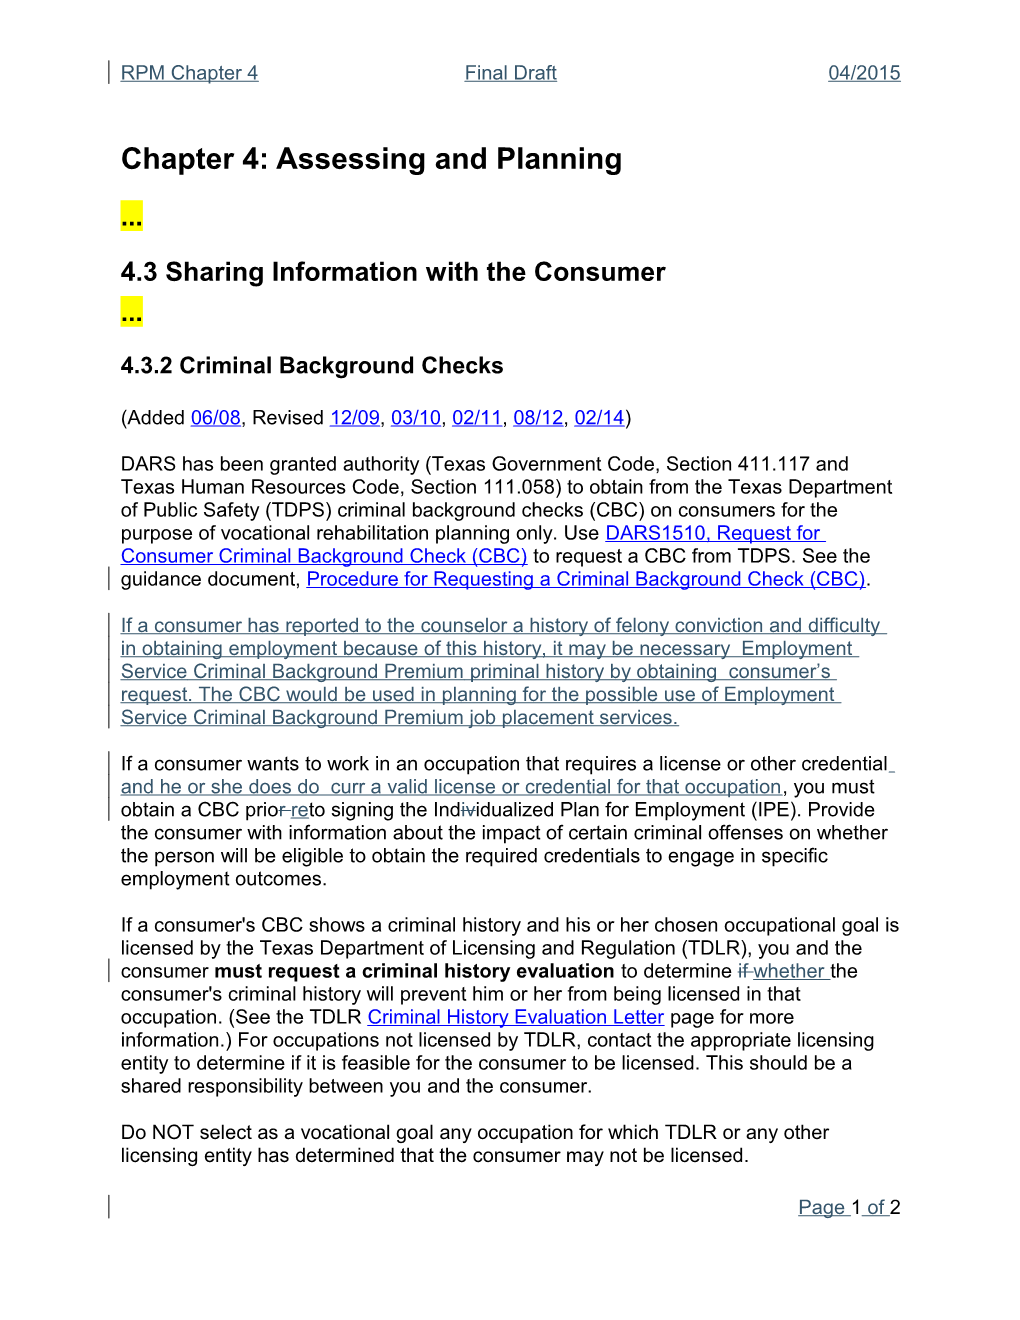 Chapter 4: Assessing and Planning